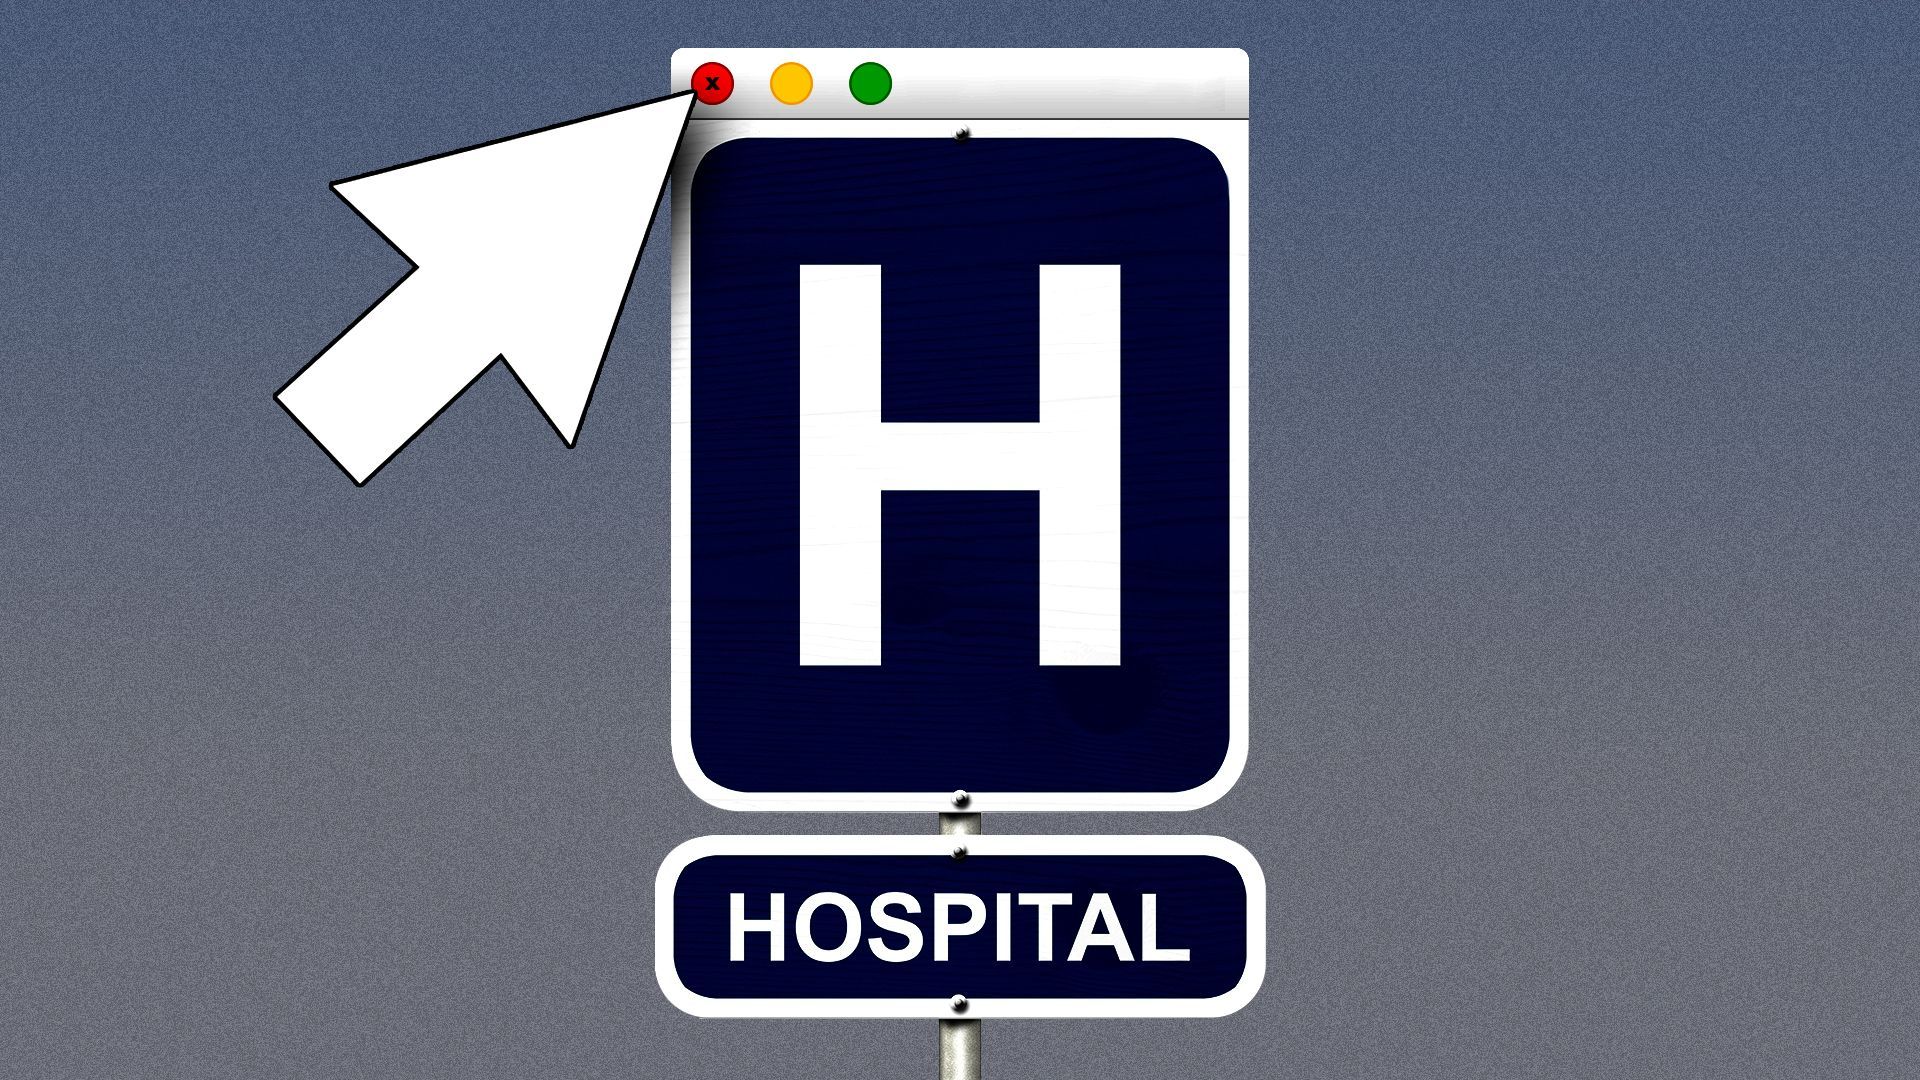 Illustration of a cursor arrow clicking the close button on a dialogue box top bar which is attached to the top of a hospital road sign